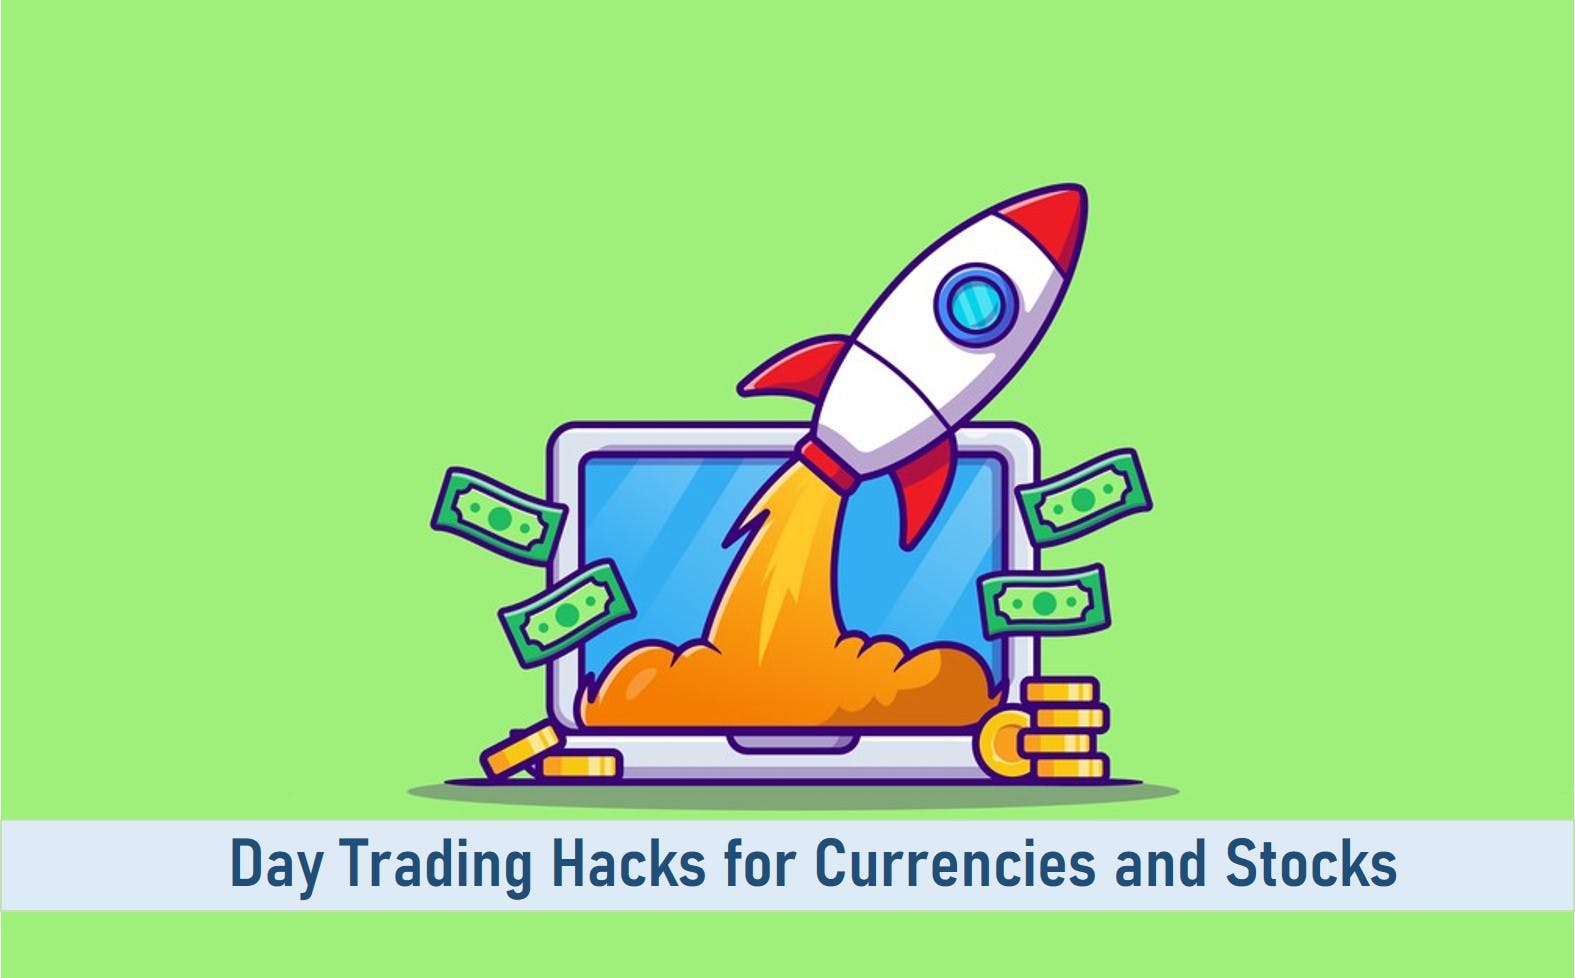 Day Trading Hacks for Currencies and Stocks